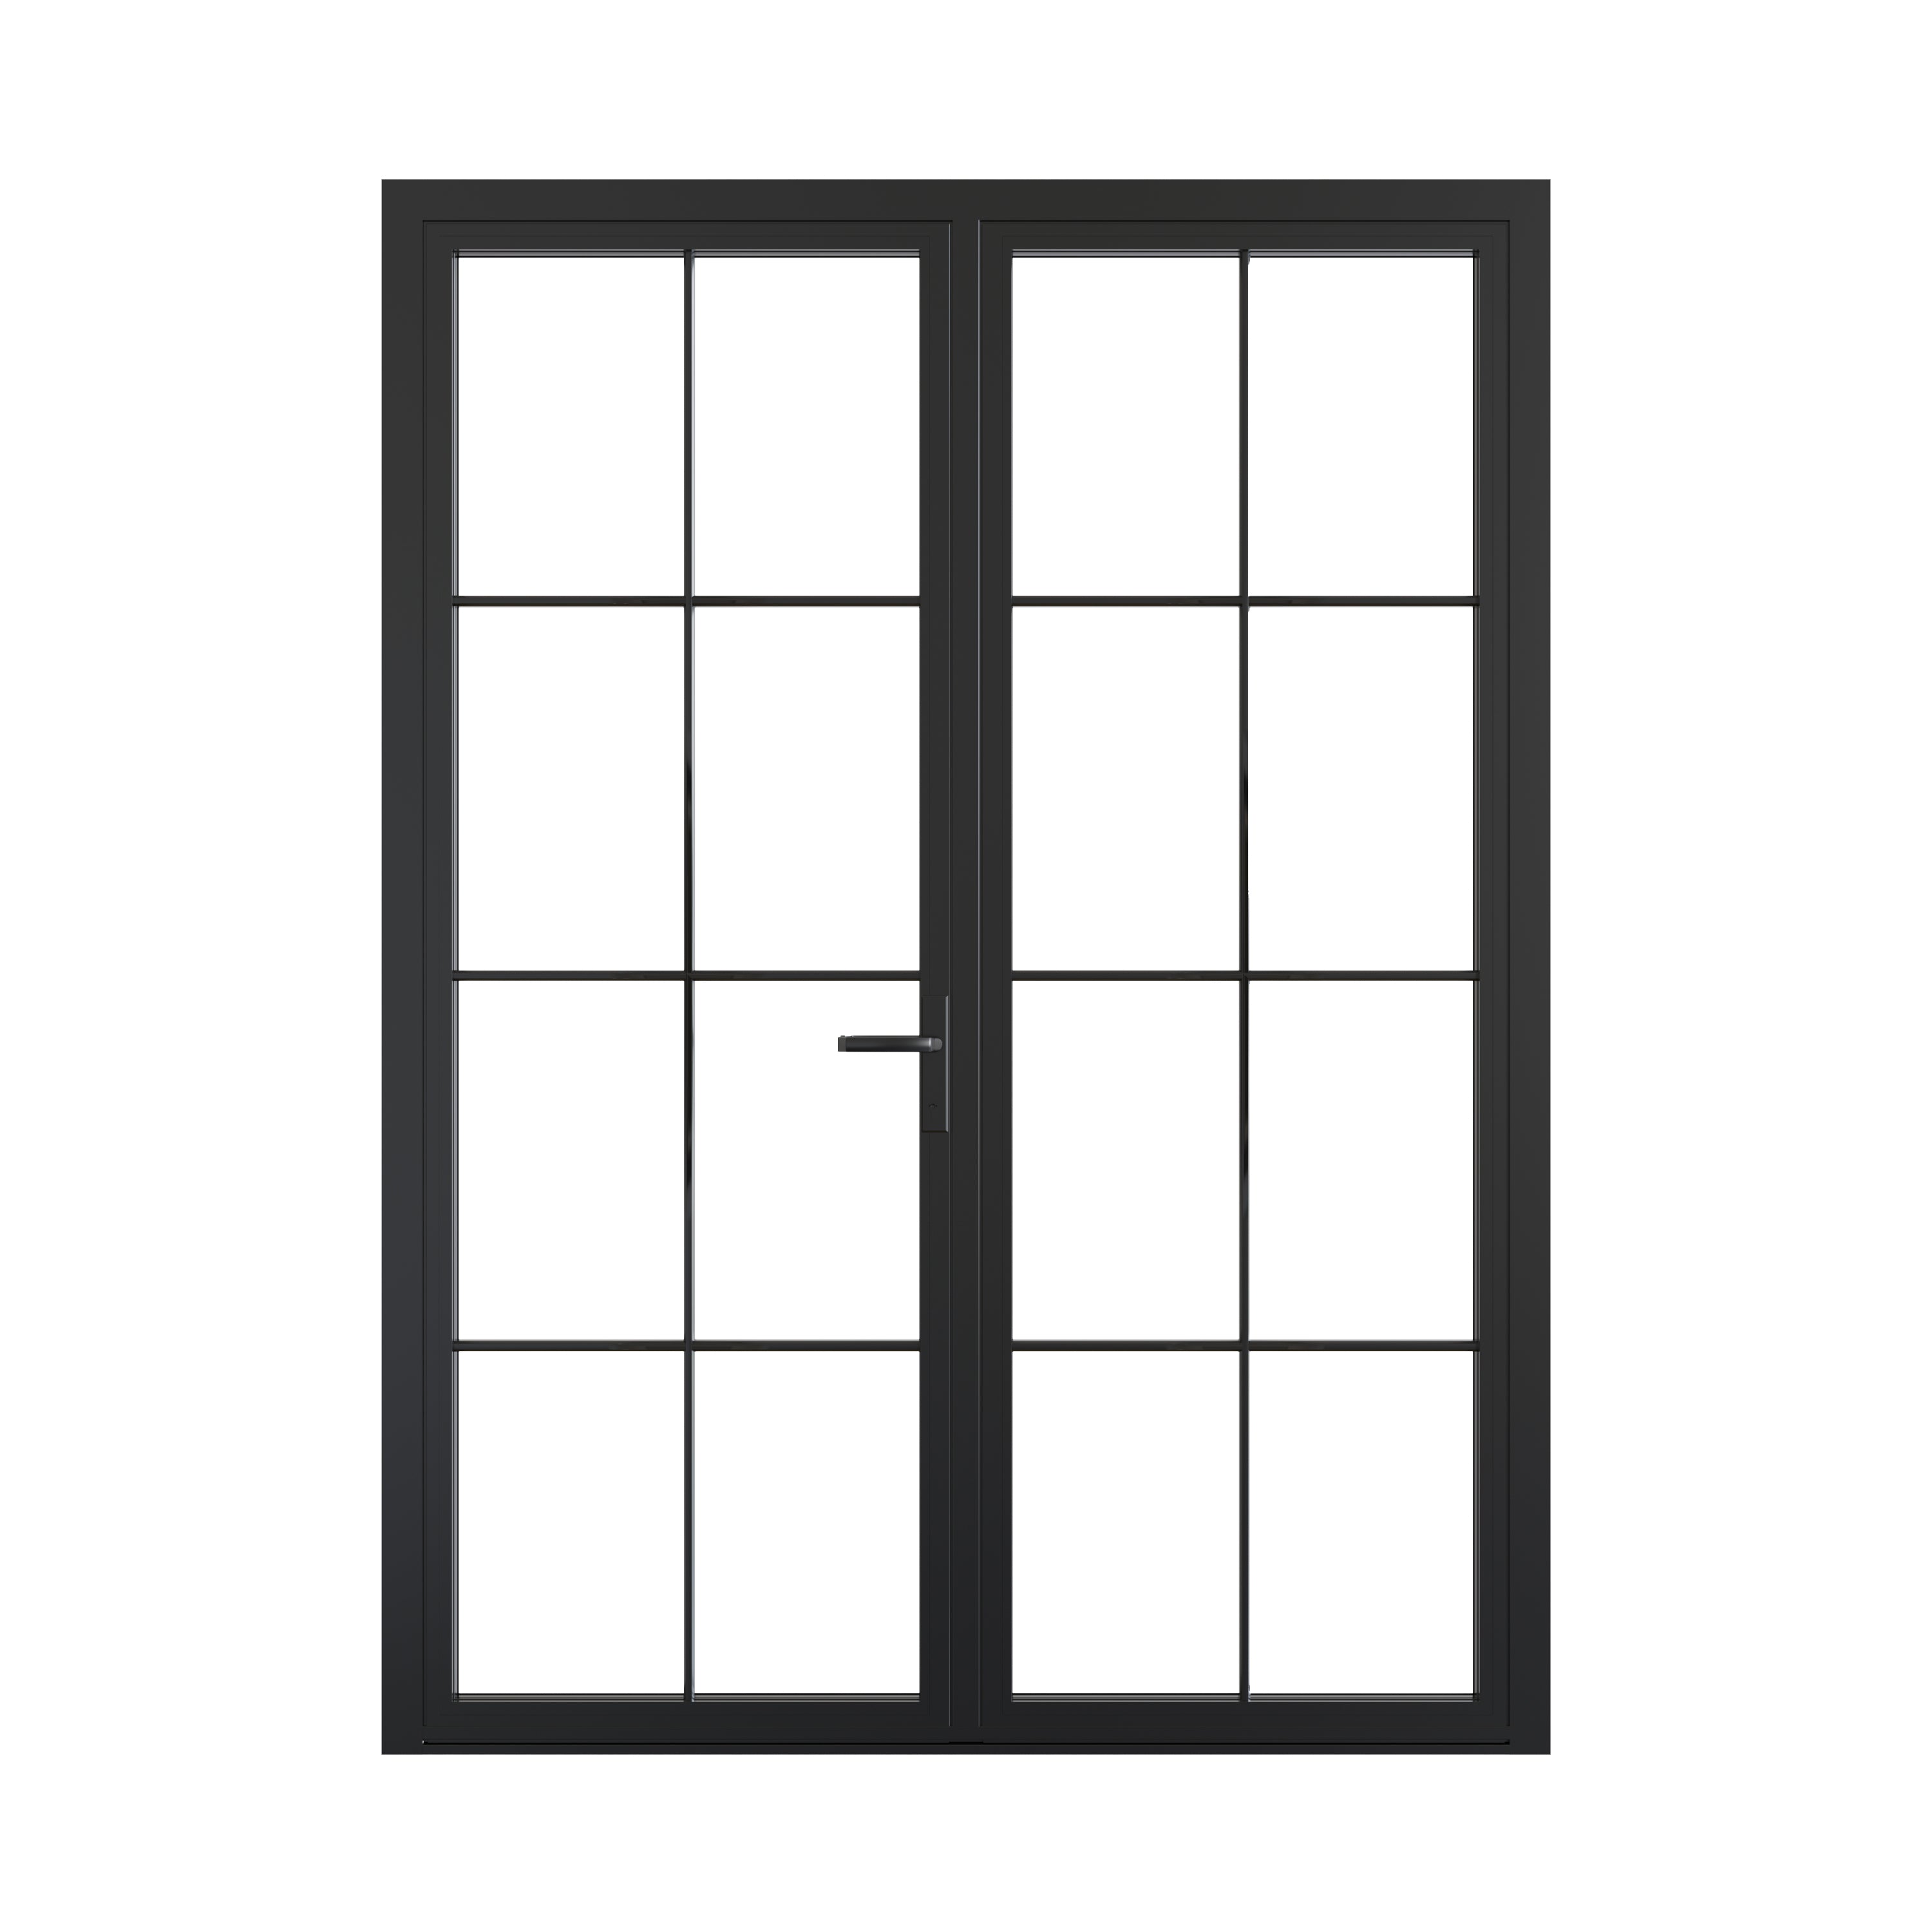 All-Glass Aluminum Metal French Doors - Triple Glazed - Thermally Broken